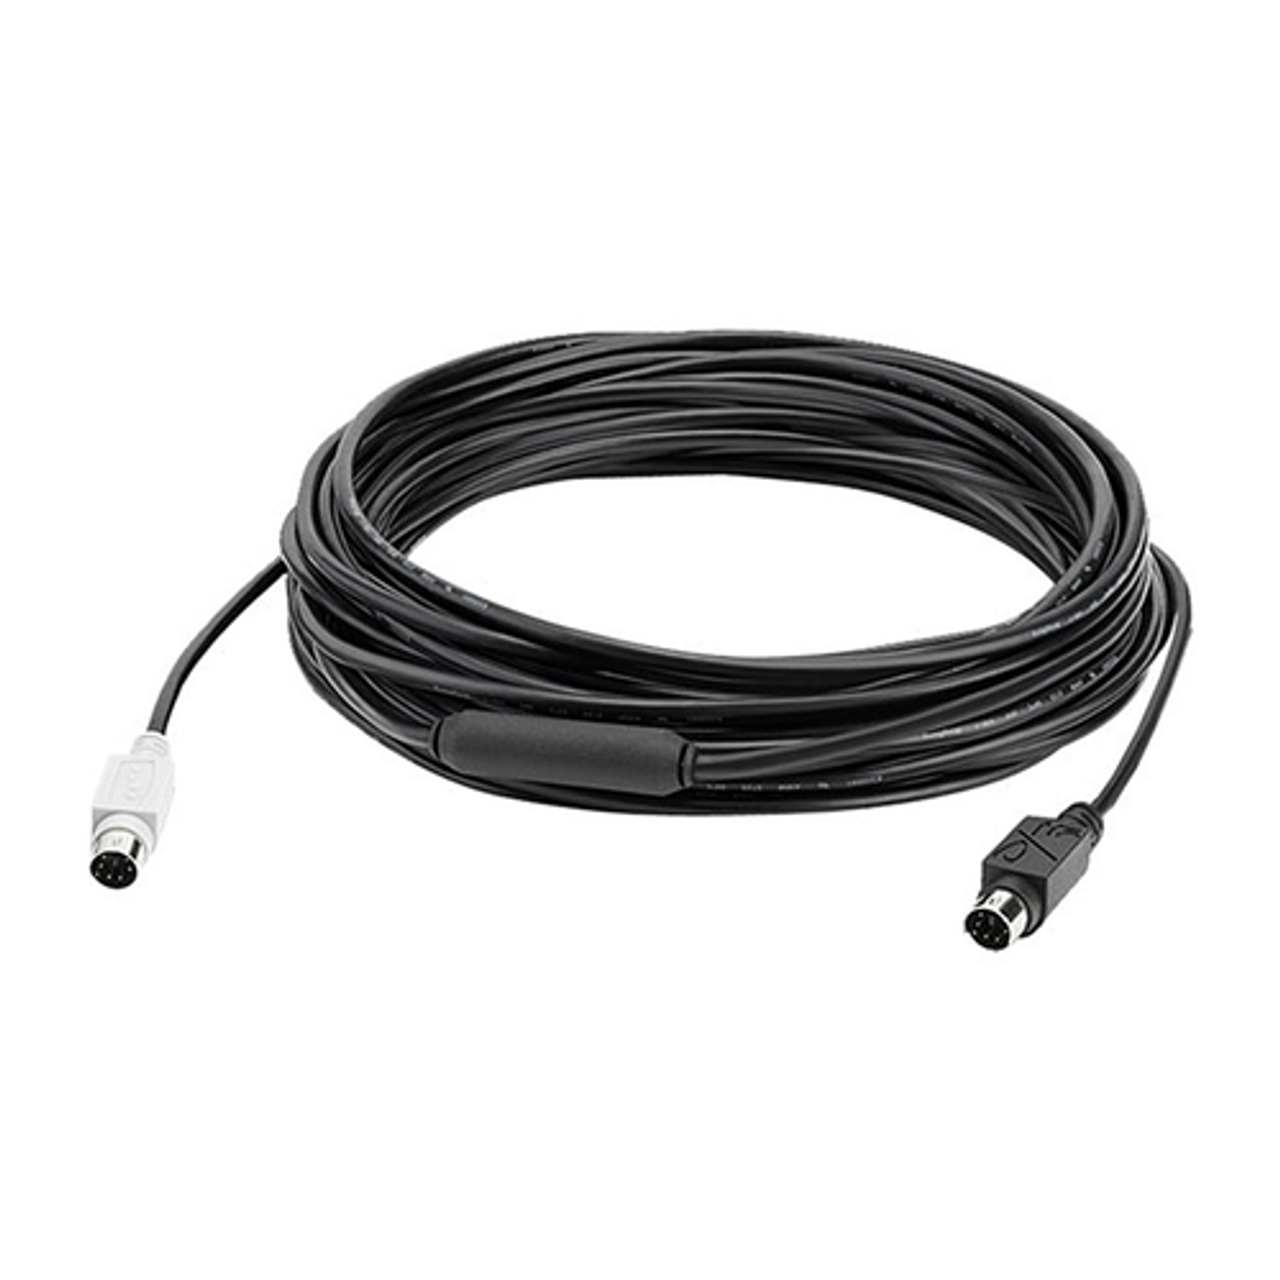 33 ft Extender Cable for Logitech GROUP Conference System - Black